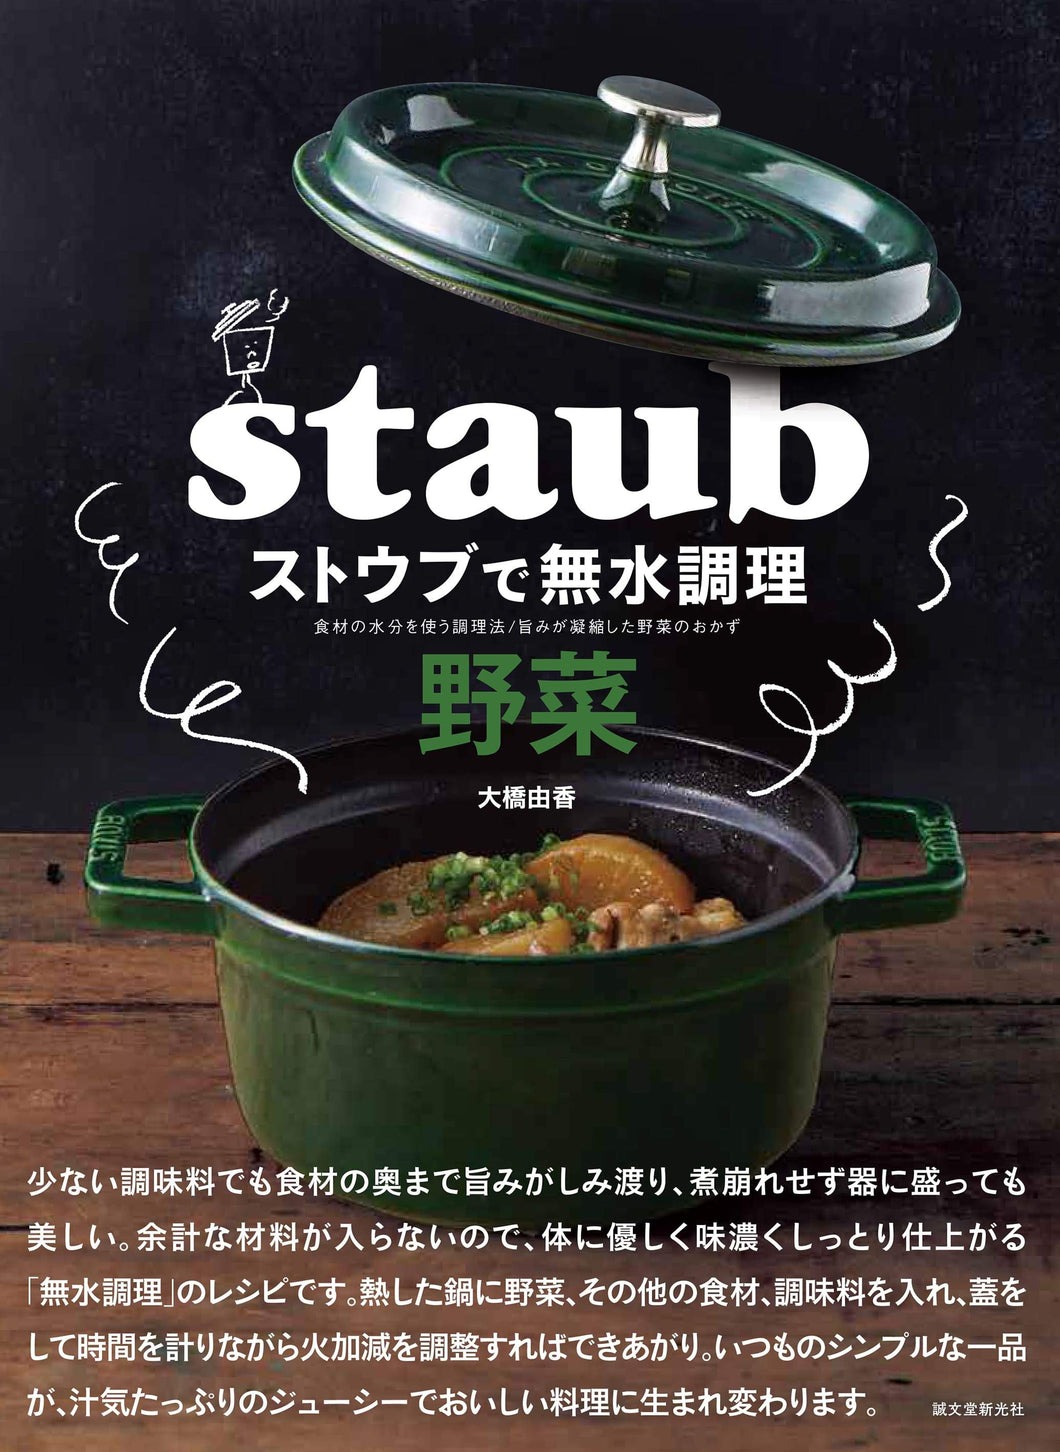 Anhydrous cooking with Staub Vegetables